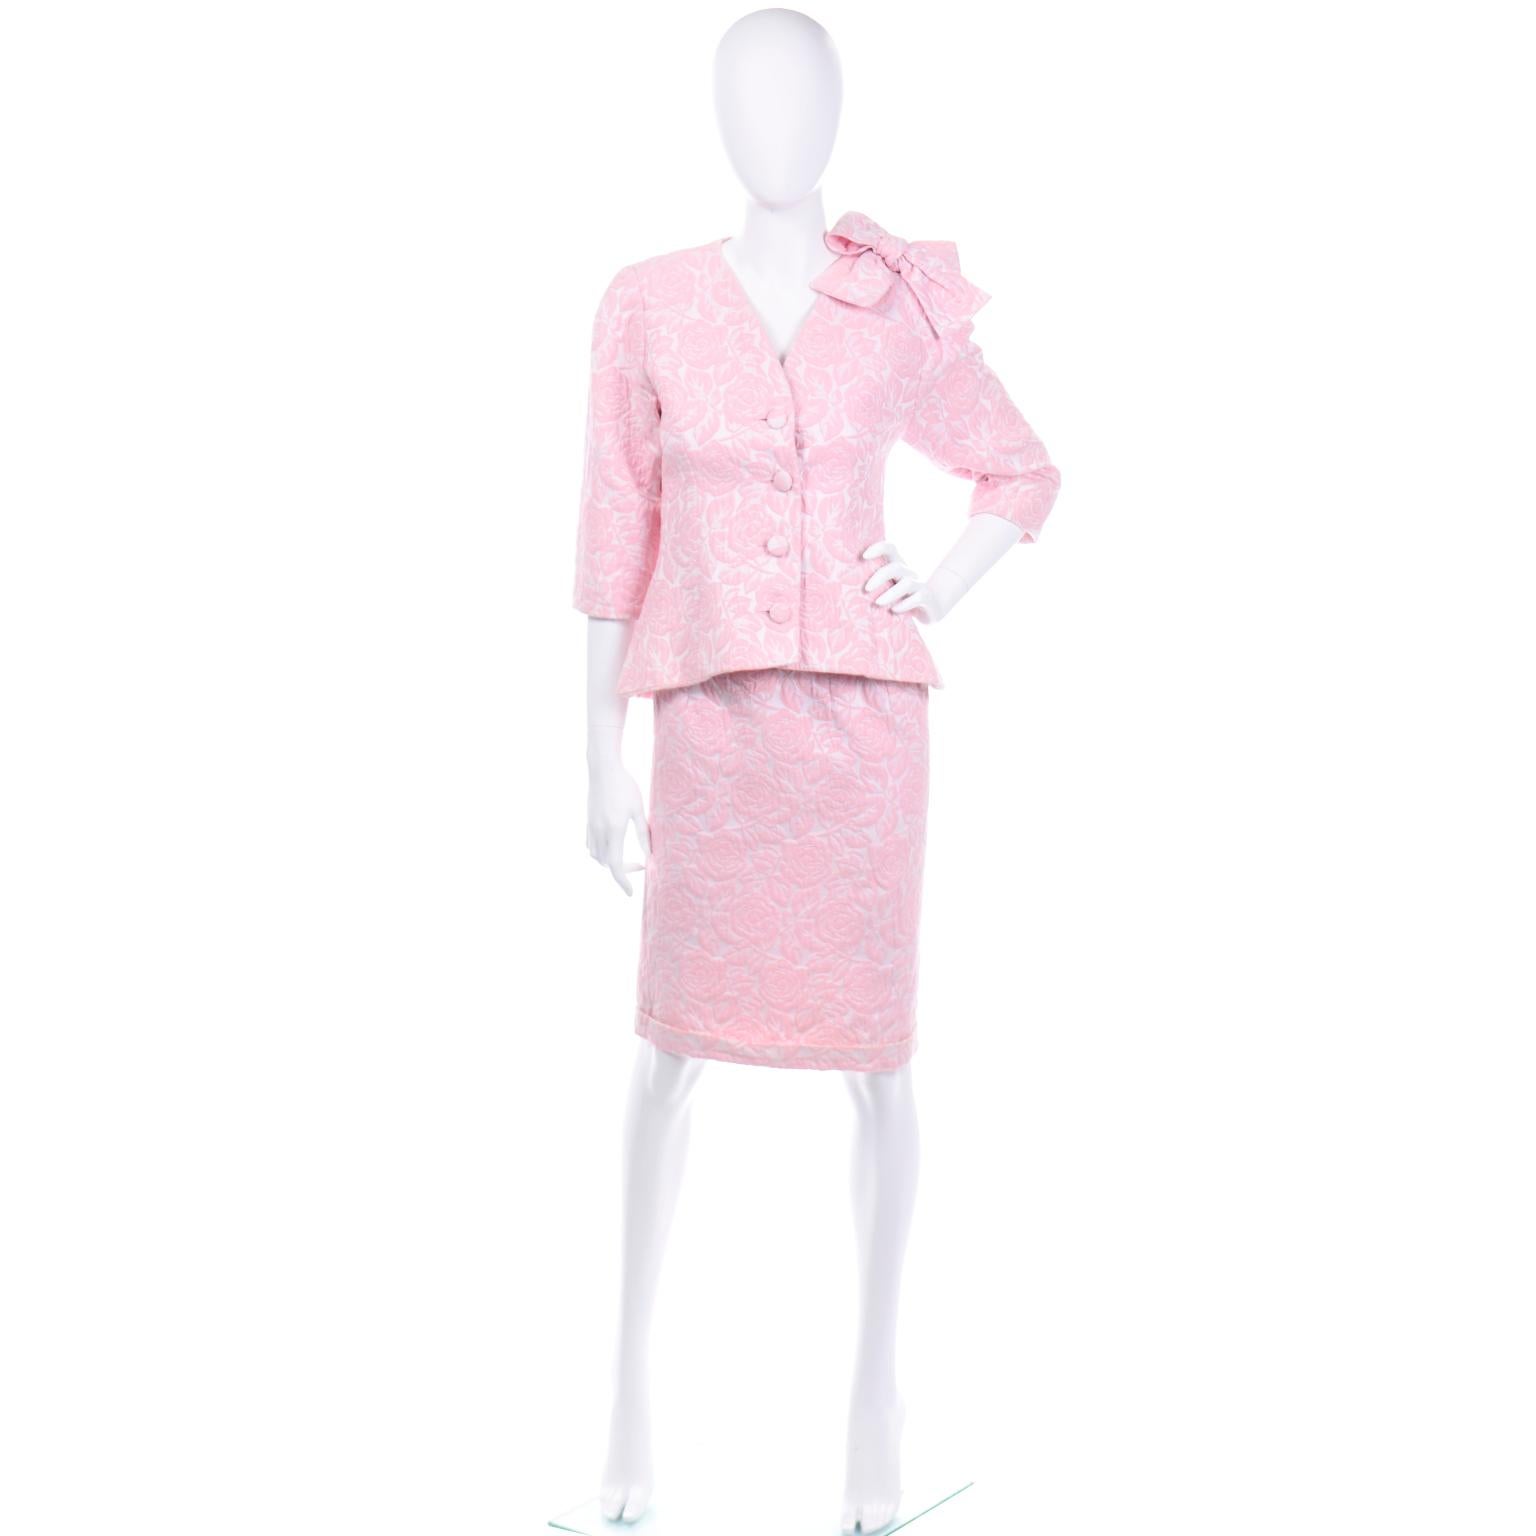 This is a very pretty pink floral brocade skirt suit from Guy Laroche Boutique. This 2 piece outfit would make a great day dress alternative to wear as a wedding guest or to a special lunch or event. The jacket has a high v collarless neckline with